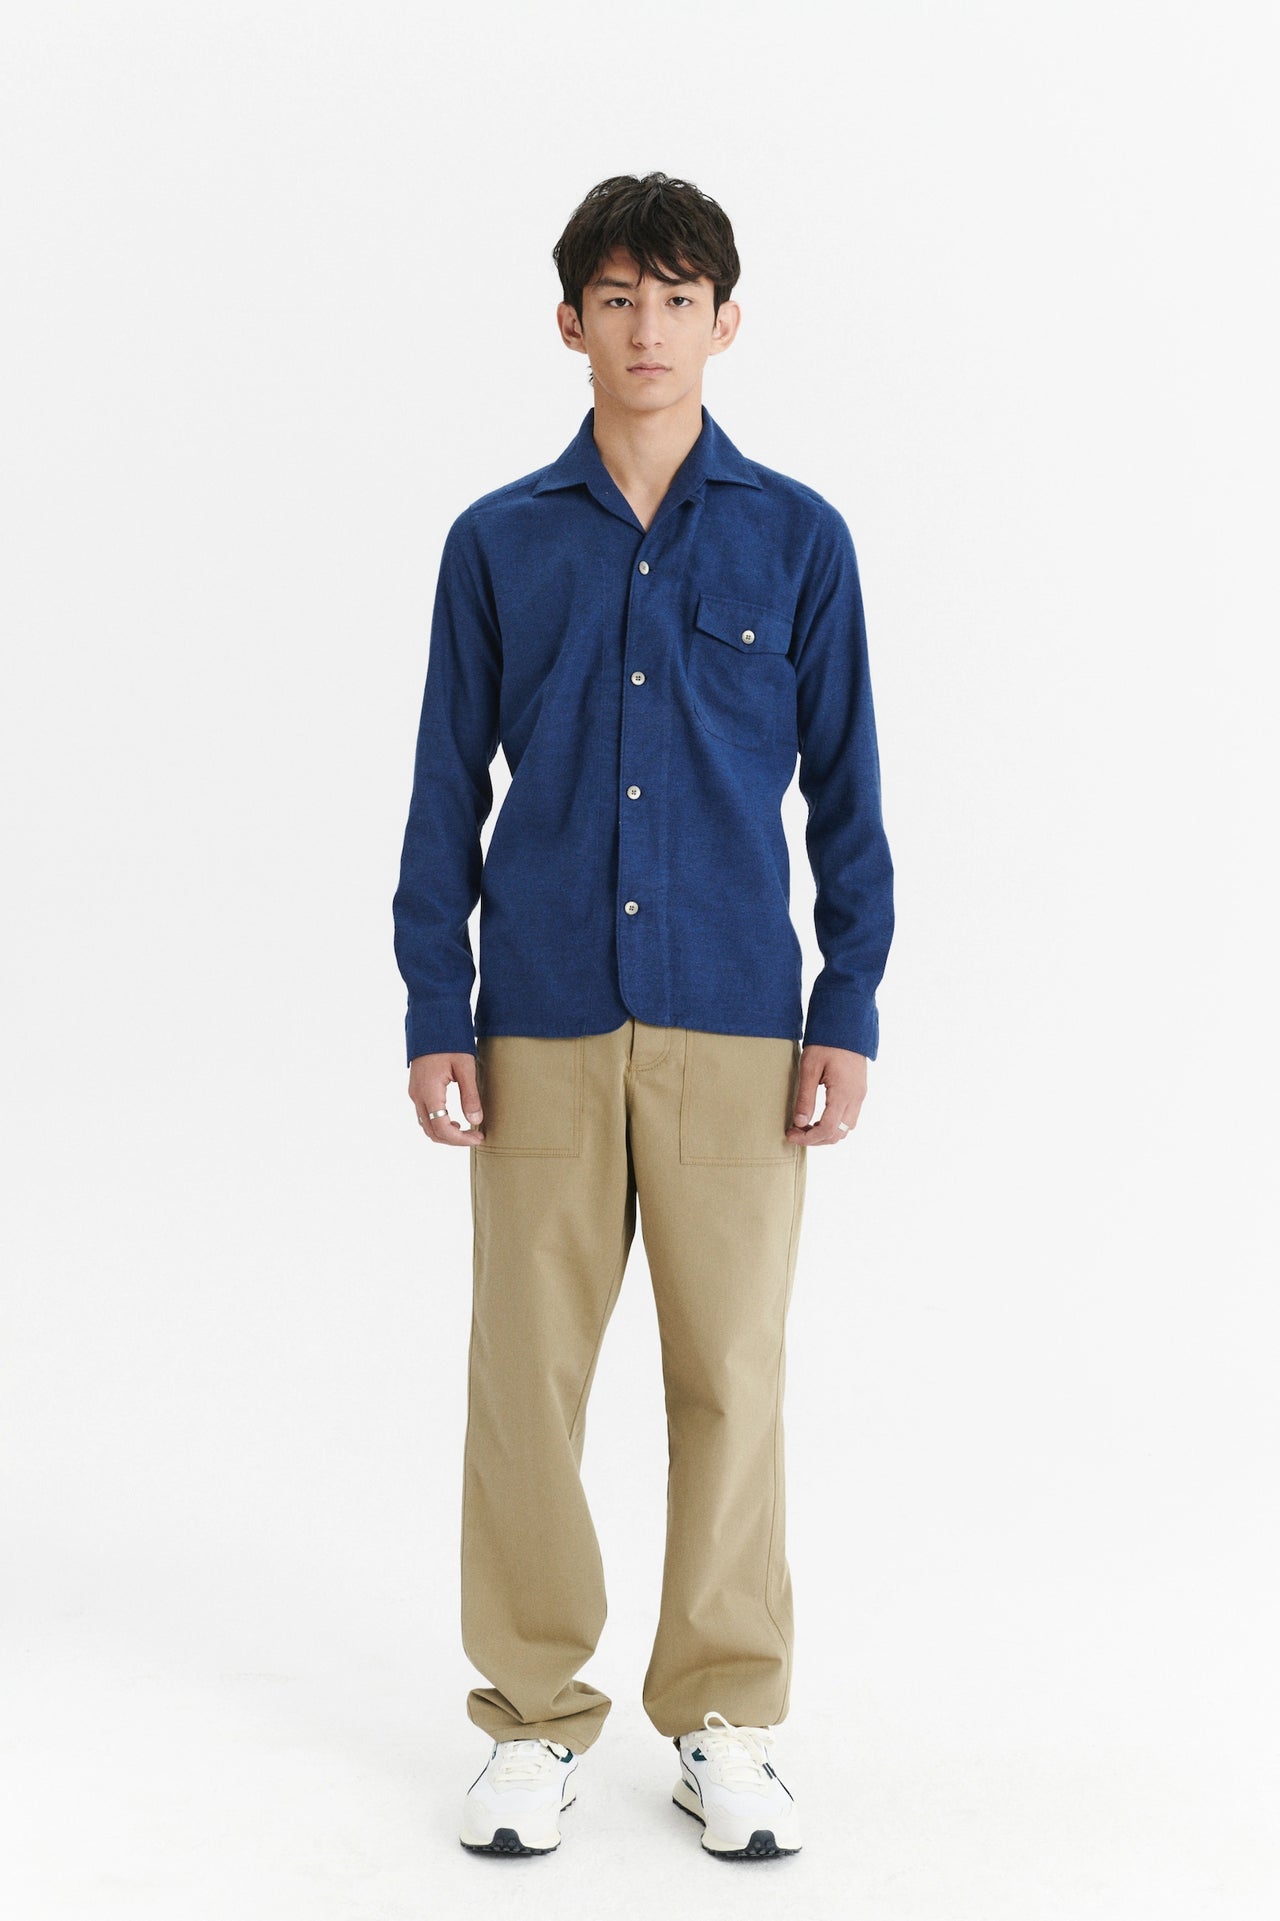 Relaxed Camp Collar Overshirt in a Profound Blue Soft Portuguese Brushed Cotton Flannel